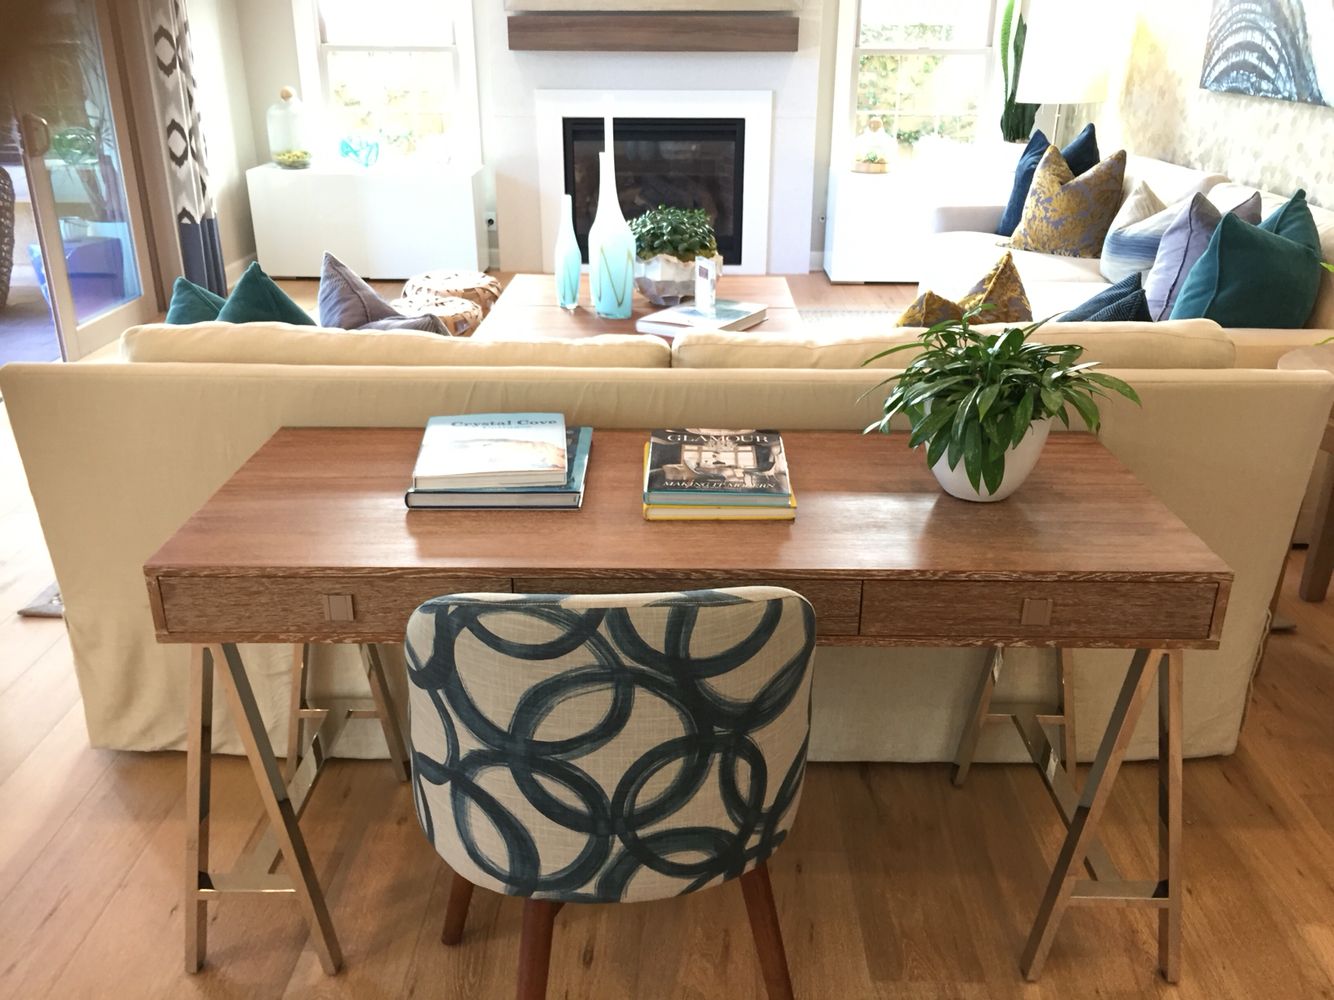 Create a Dedicated Home Office Space